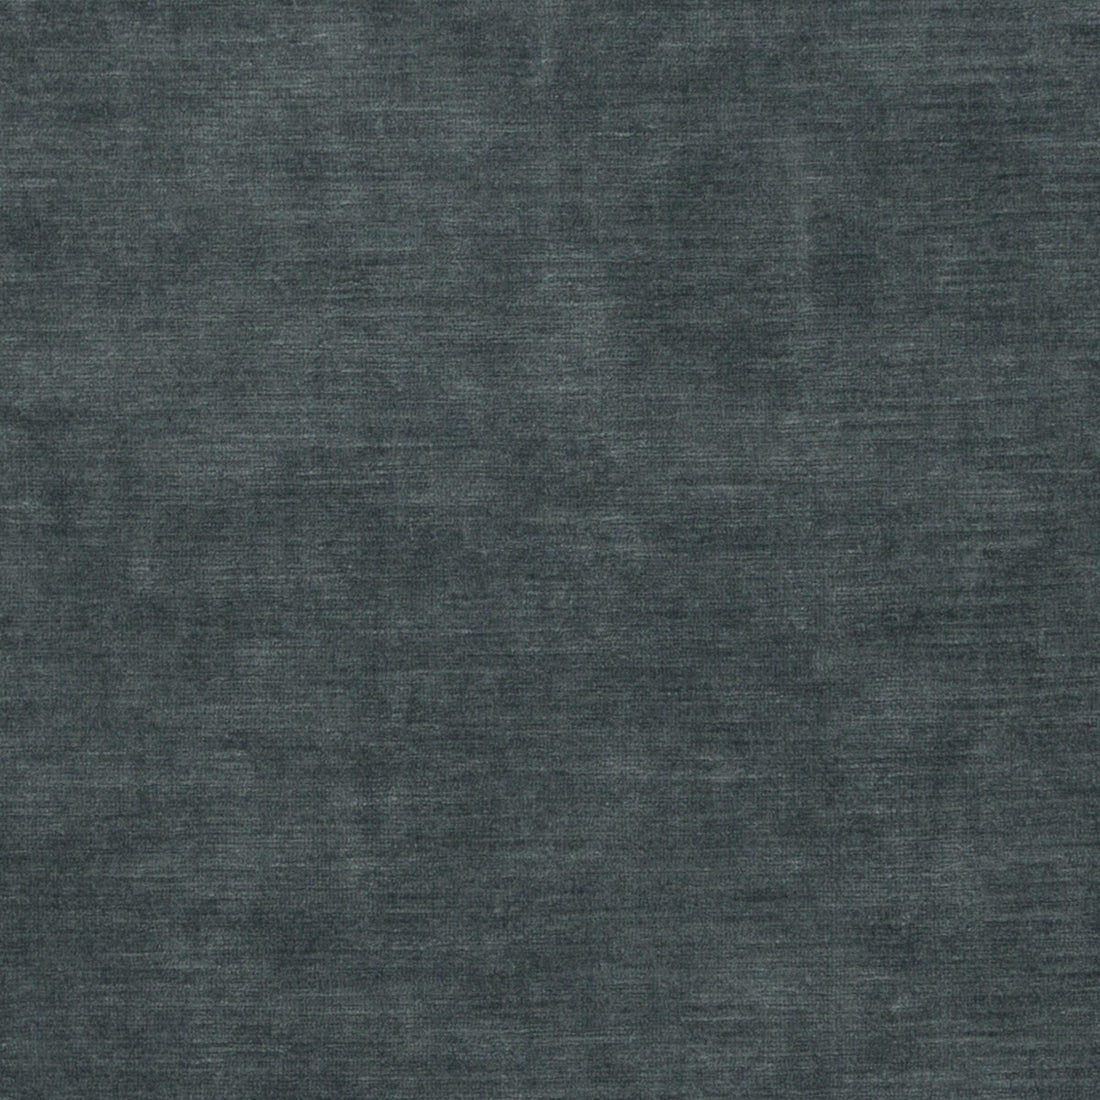 Meridian Velvet fabric in slate color - pattern ED85292.940.0 - by Threads in the Meridian collection